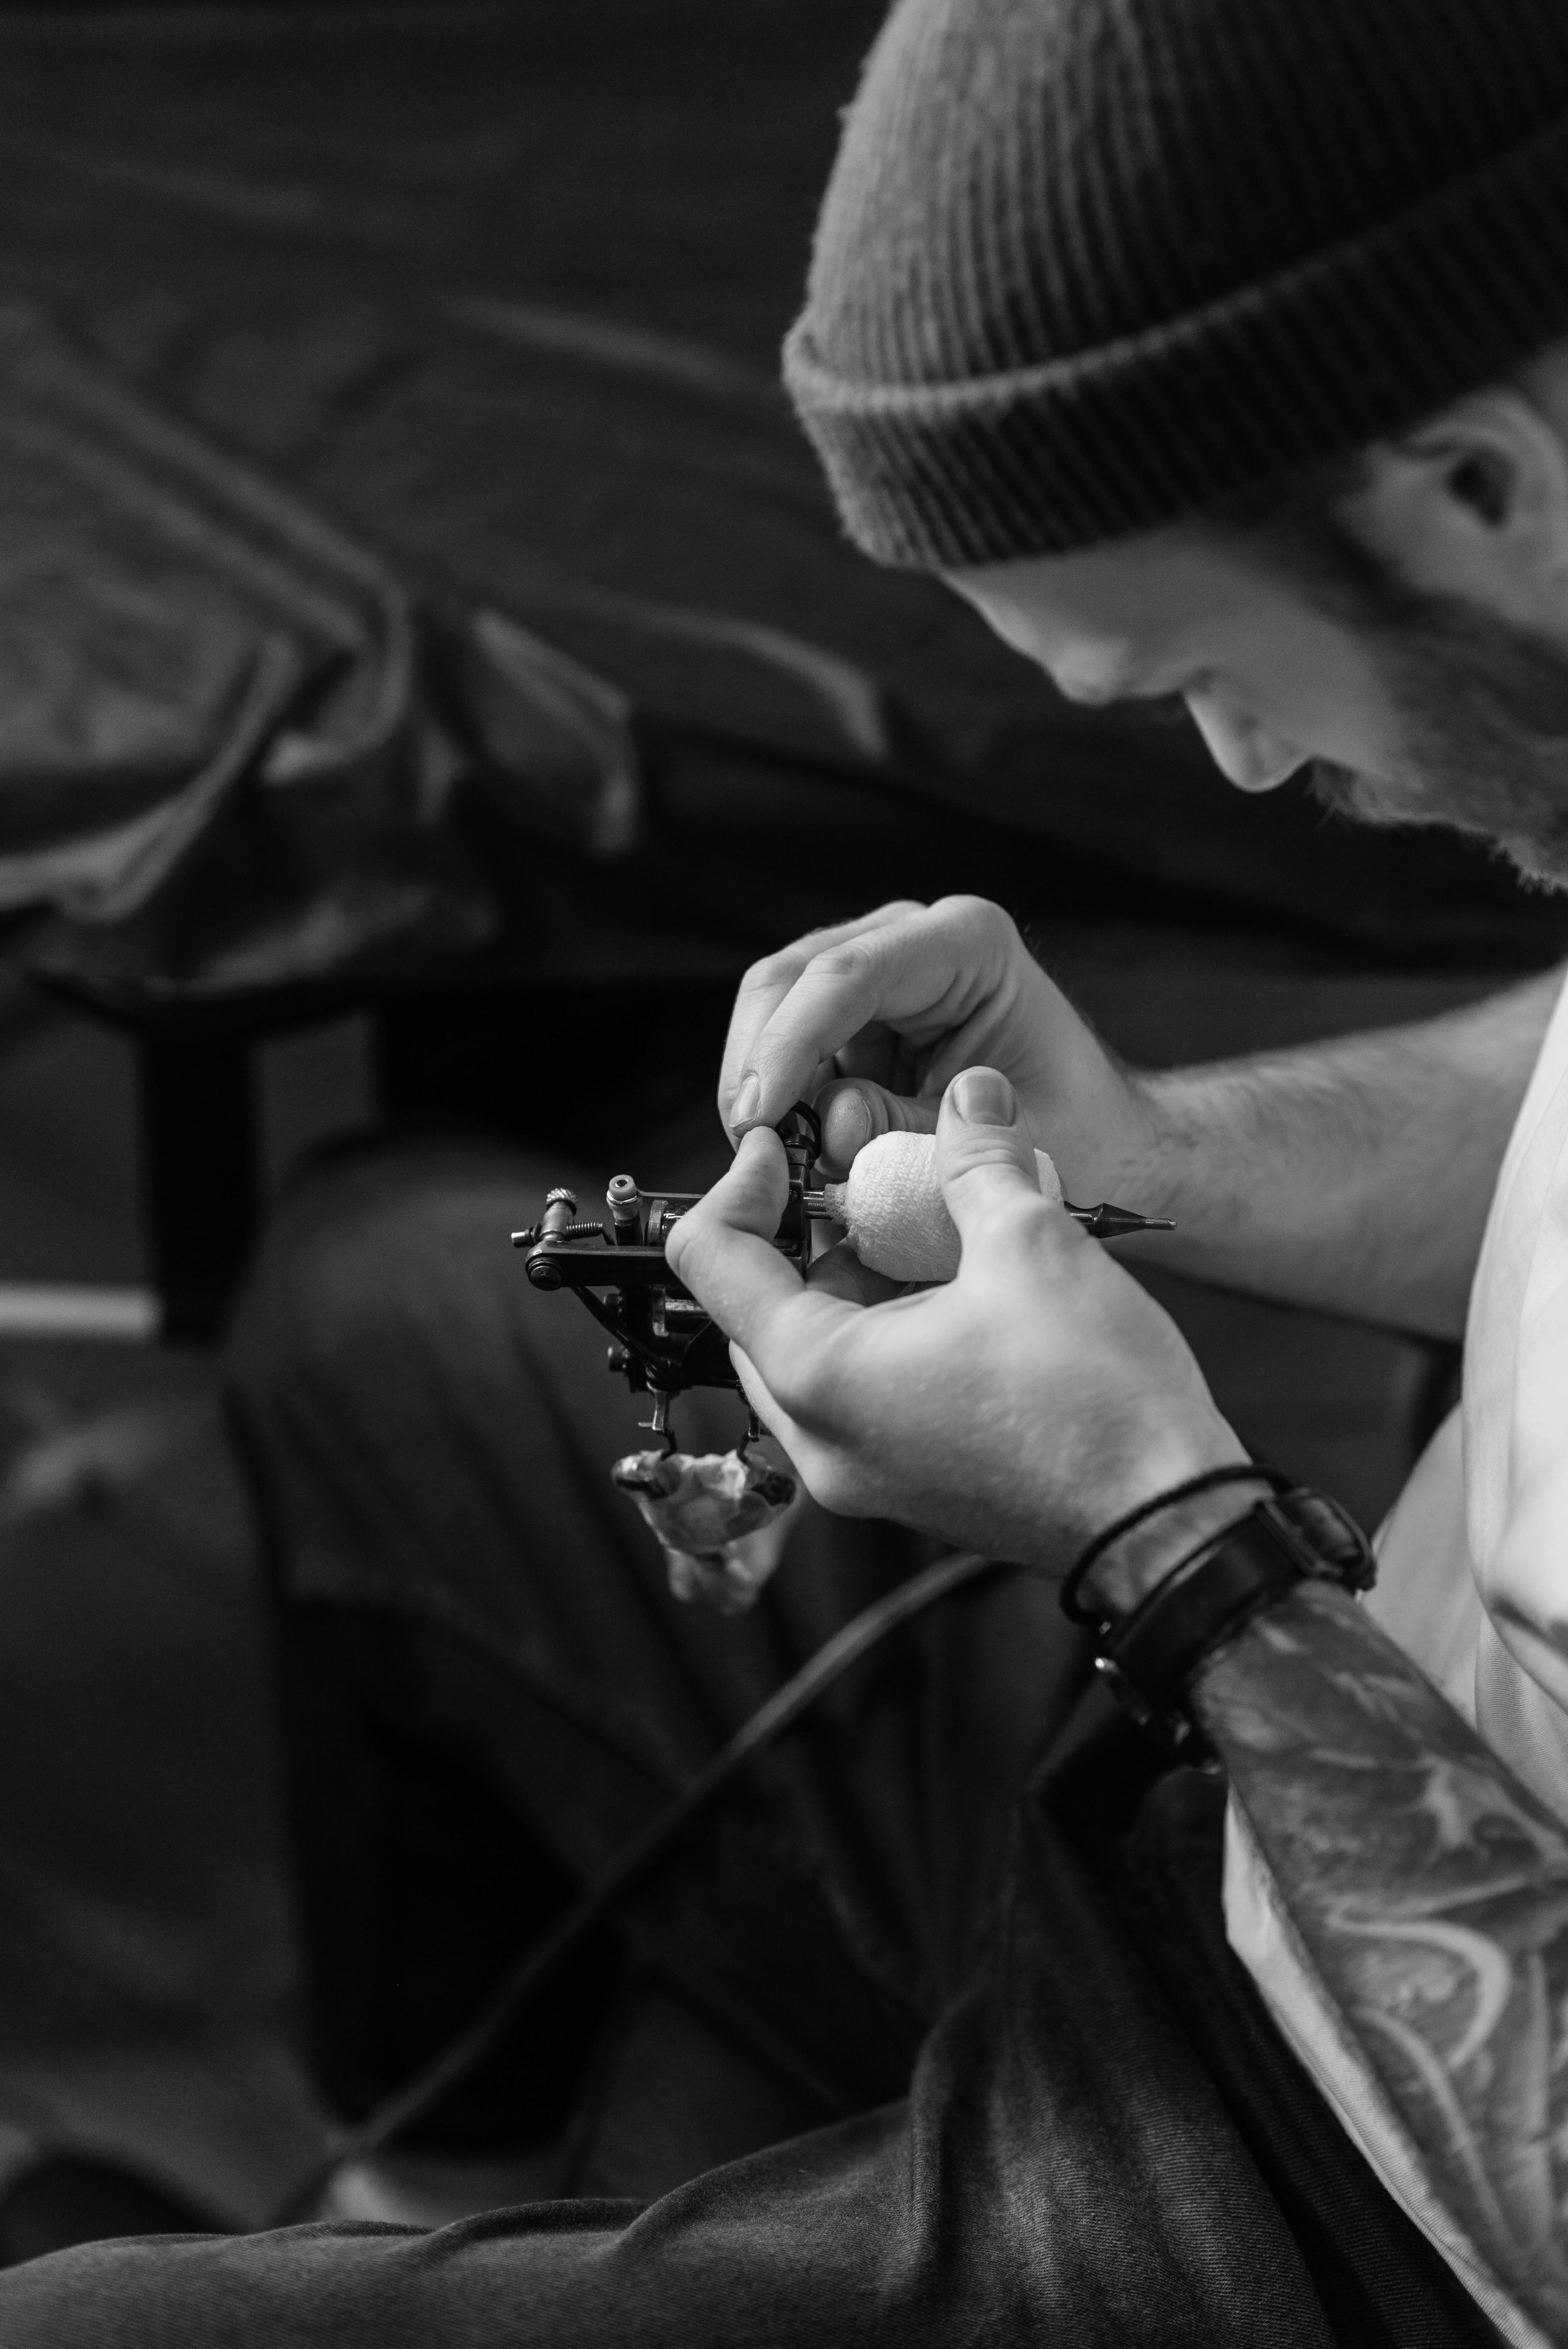 What is the best professional tattoo kit? - Quora